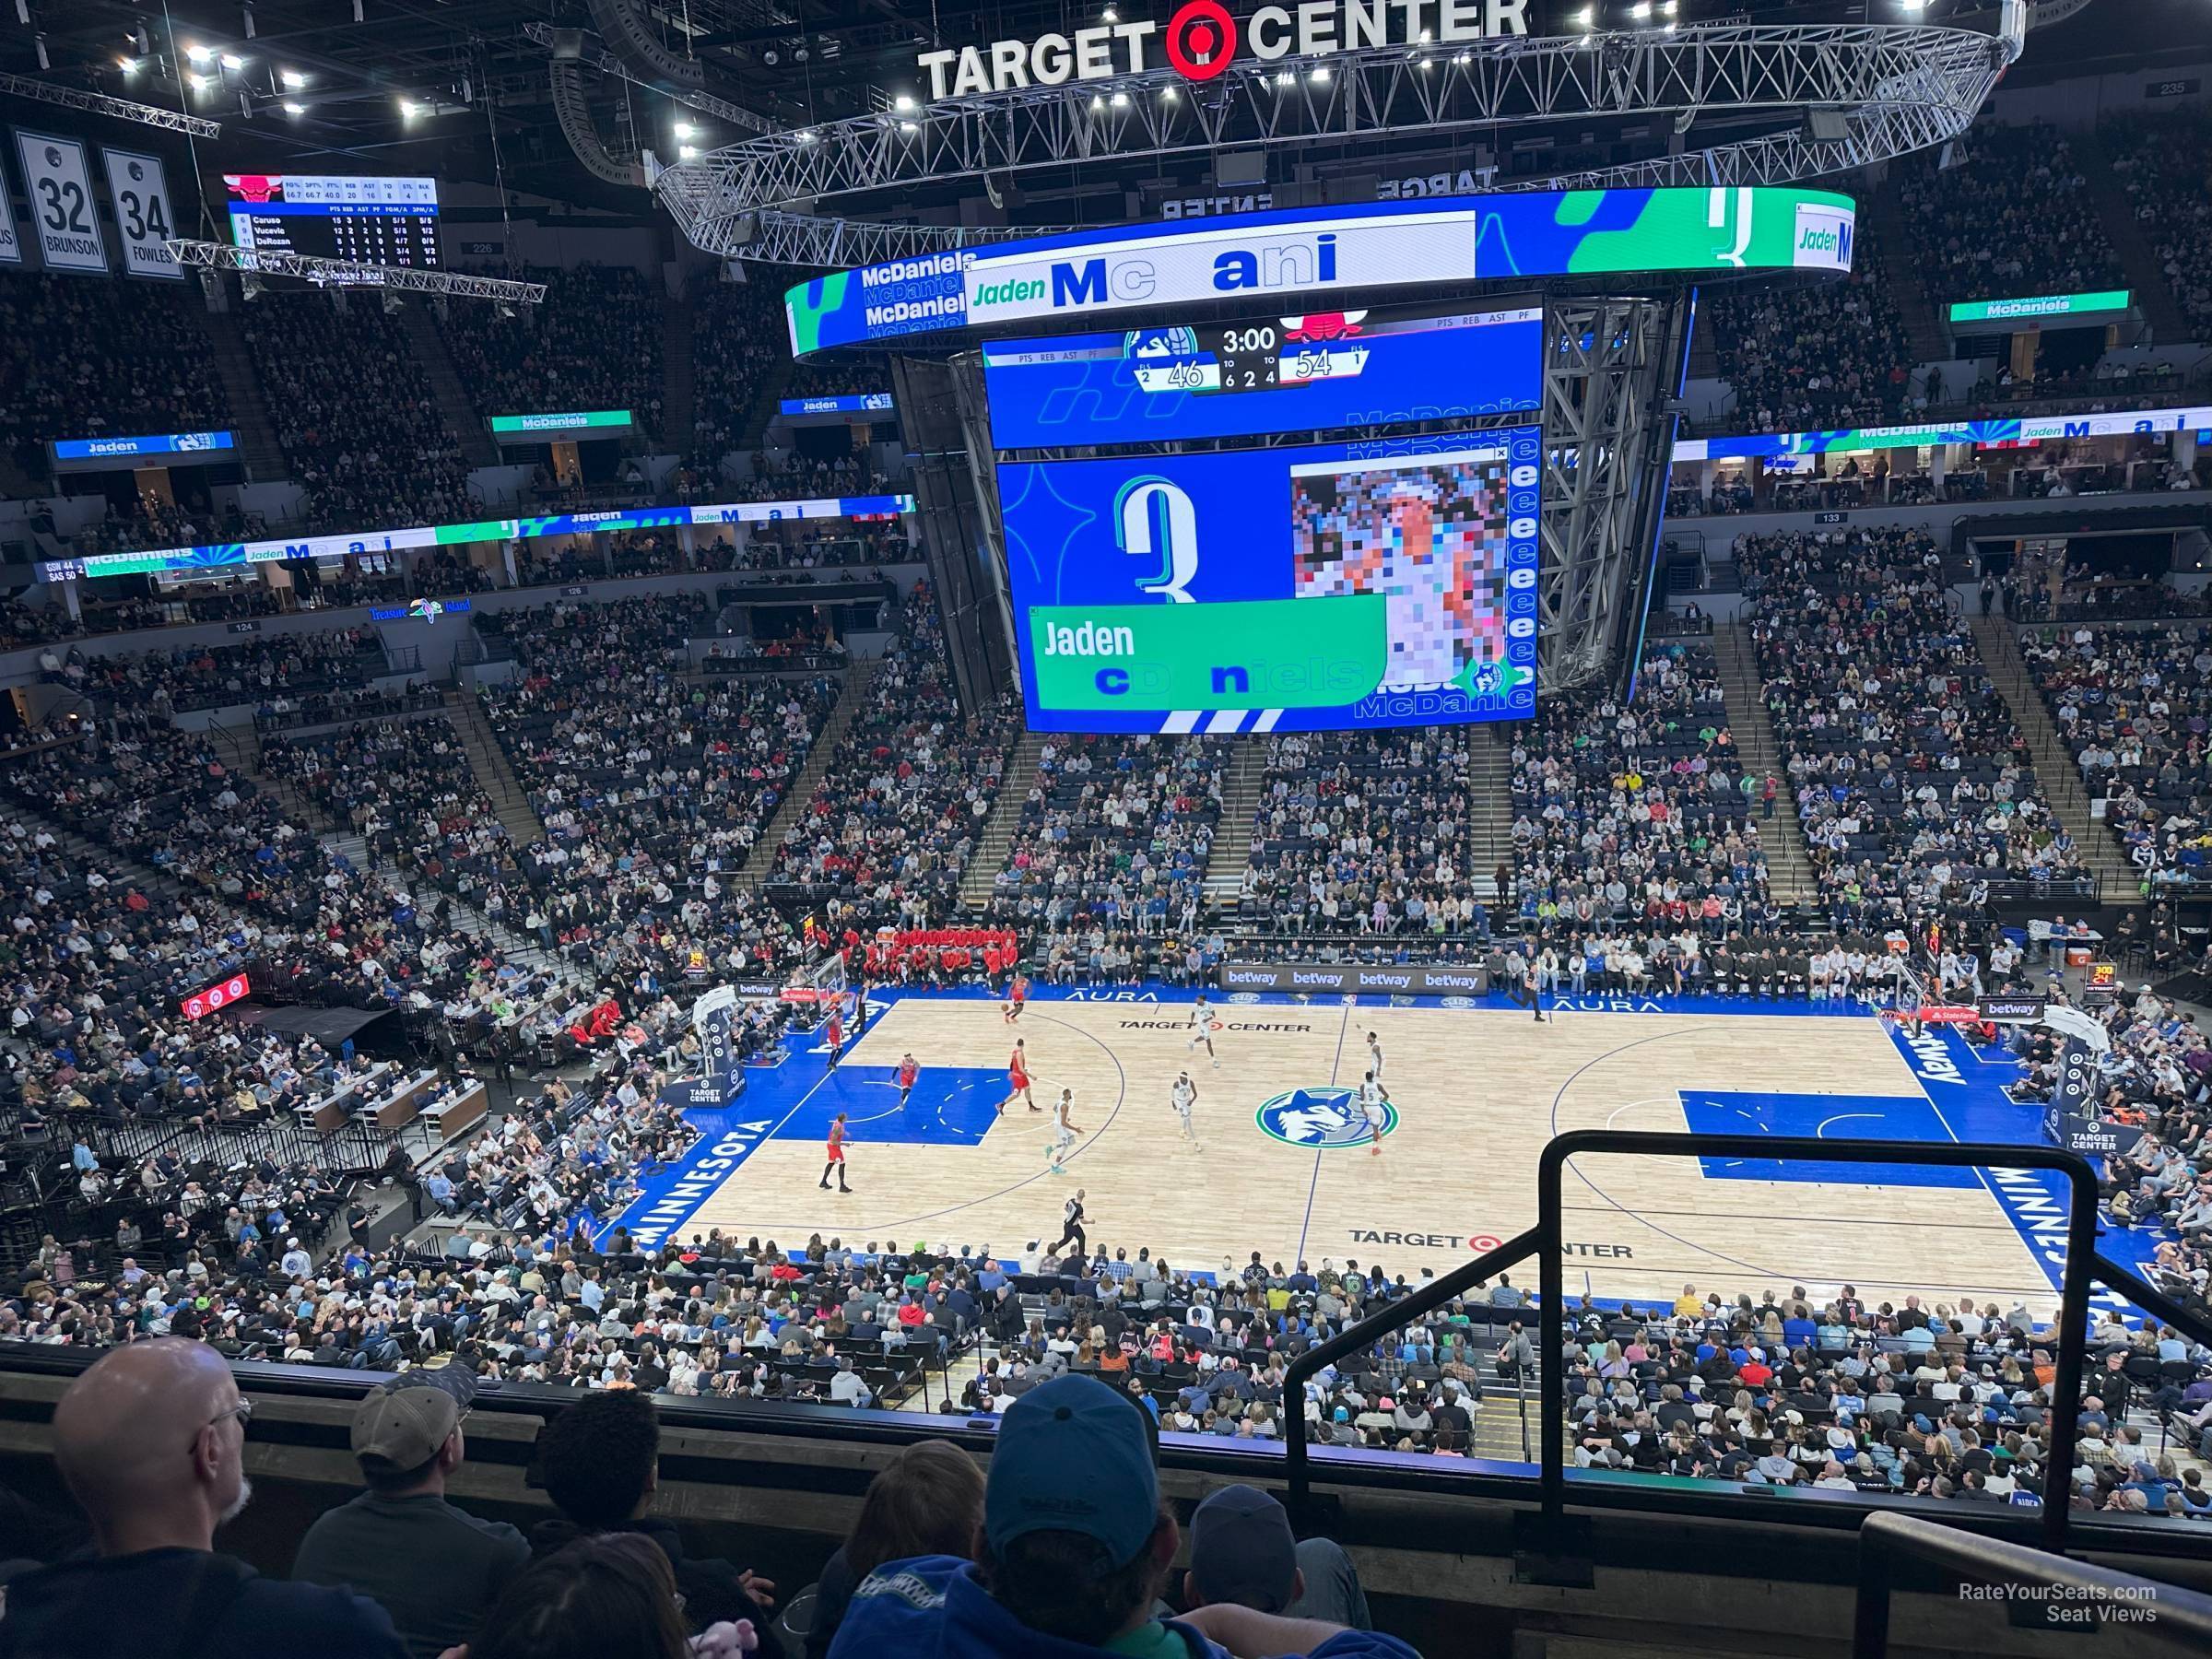 section 211, row c seat view  for basketball - target center